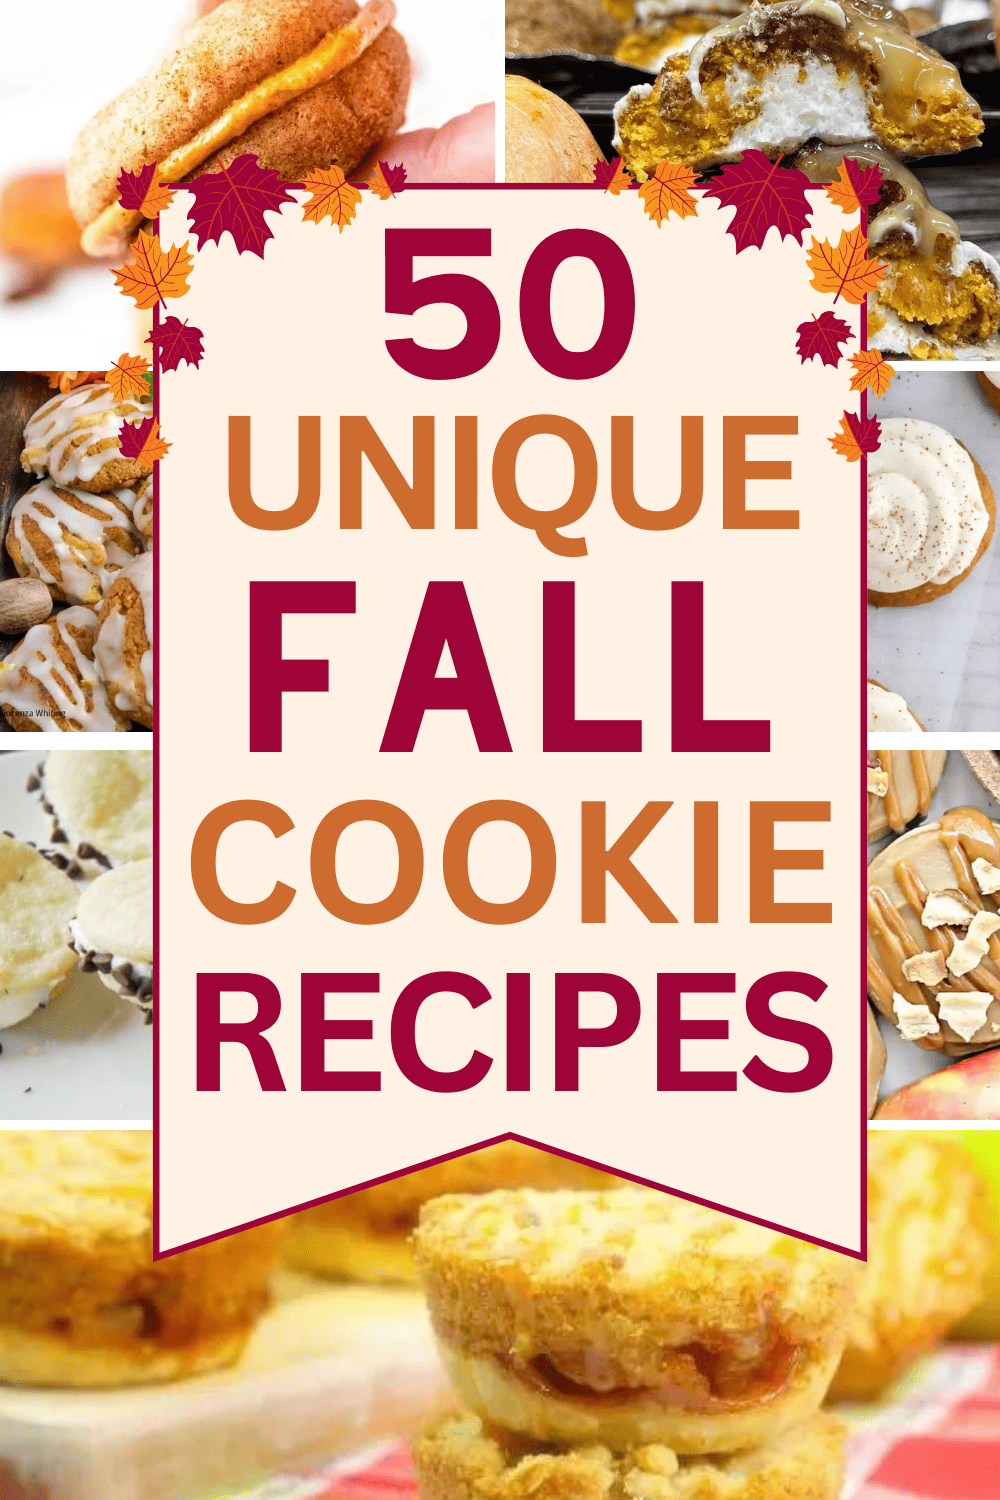 Cute fall cookie ideas! Looking for the best fall cookie recipes? You must try these quick and easy fall cookies! Fall cookie ideas easy, fall baking cookies aesthetic, fall sweet treats to sell, easy autumn cookie recipes, easy cookie decorating ideas fall, fall treat ideas for work, fall cookie ideas decorated, easy fall desserts cookies, fall desserts cookies recipe, fall cookie recipes autumn baking, fall baking cookie recipes, fall baking cookies ideas, cute fall baking cookies